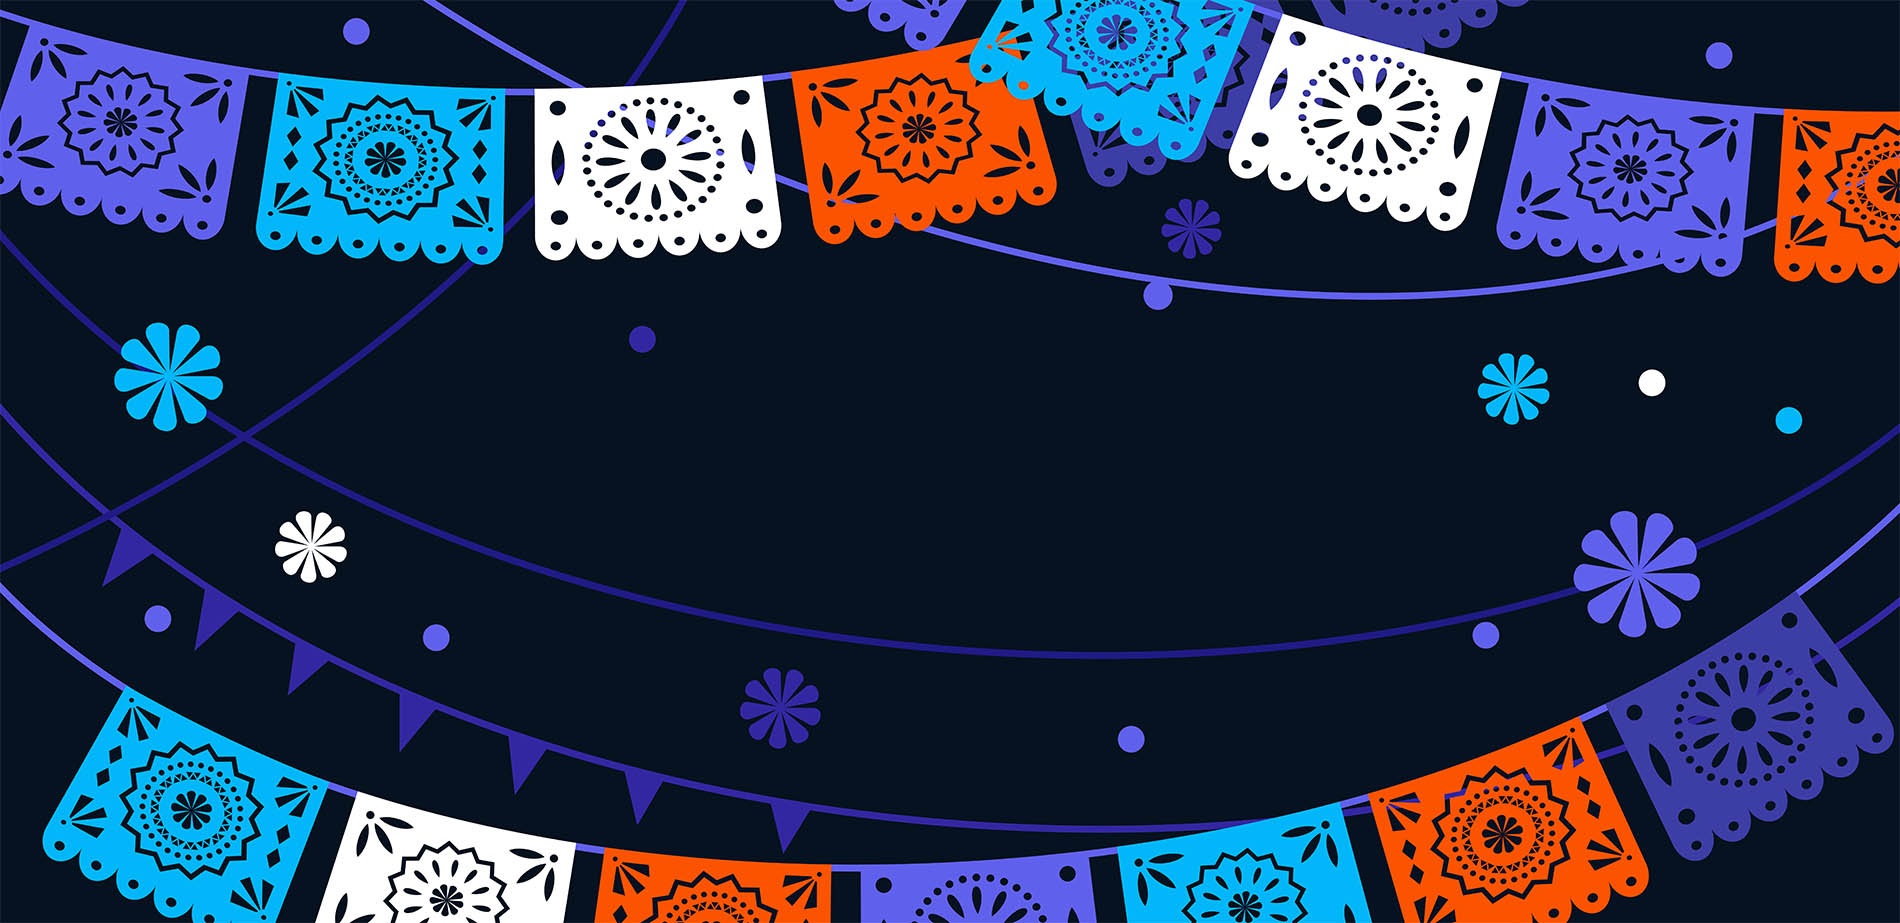 An illustration of papel picado streamers